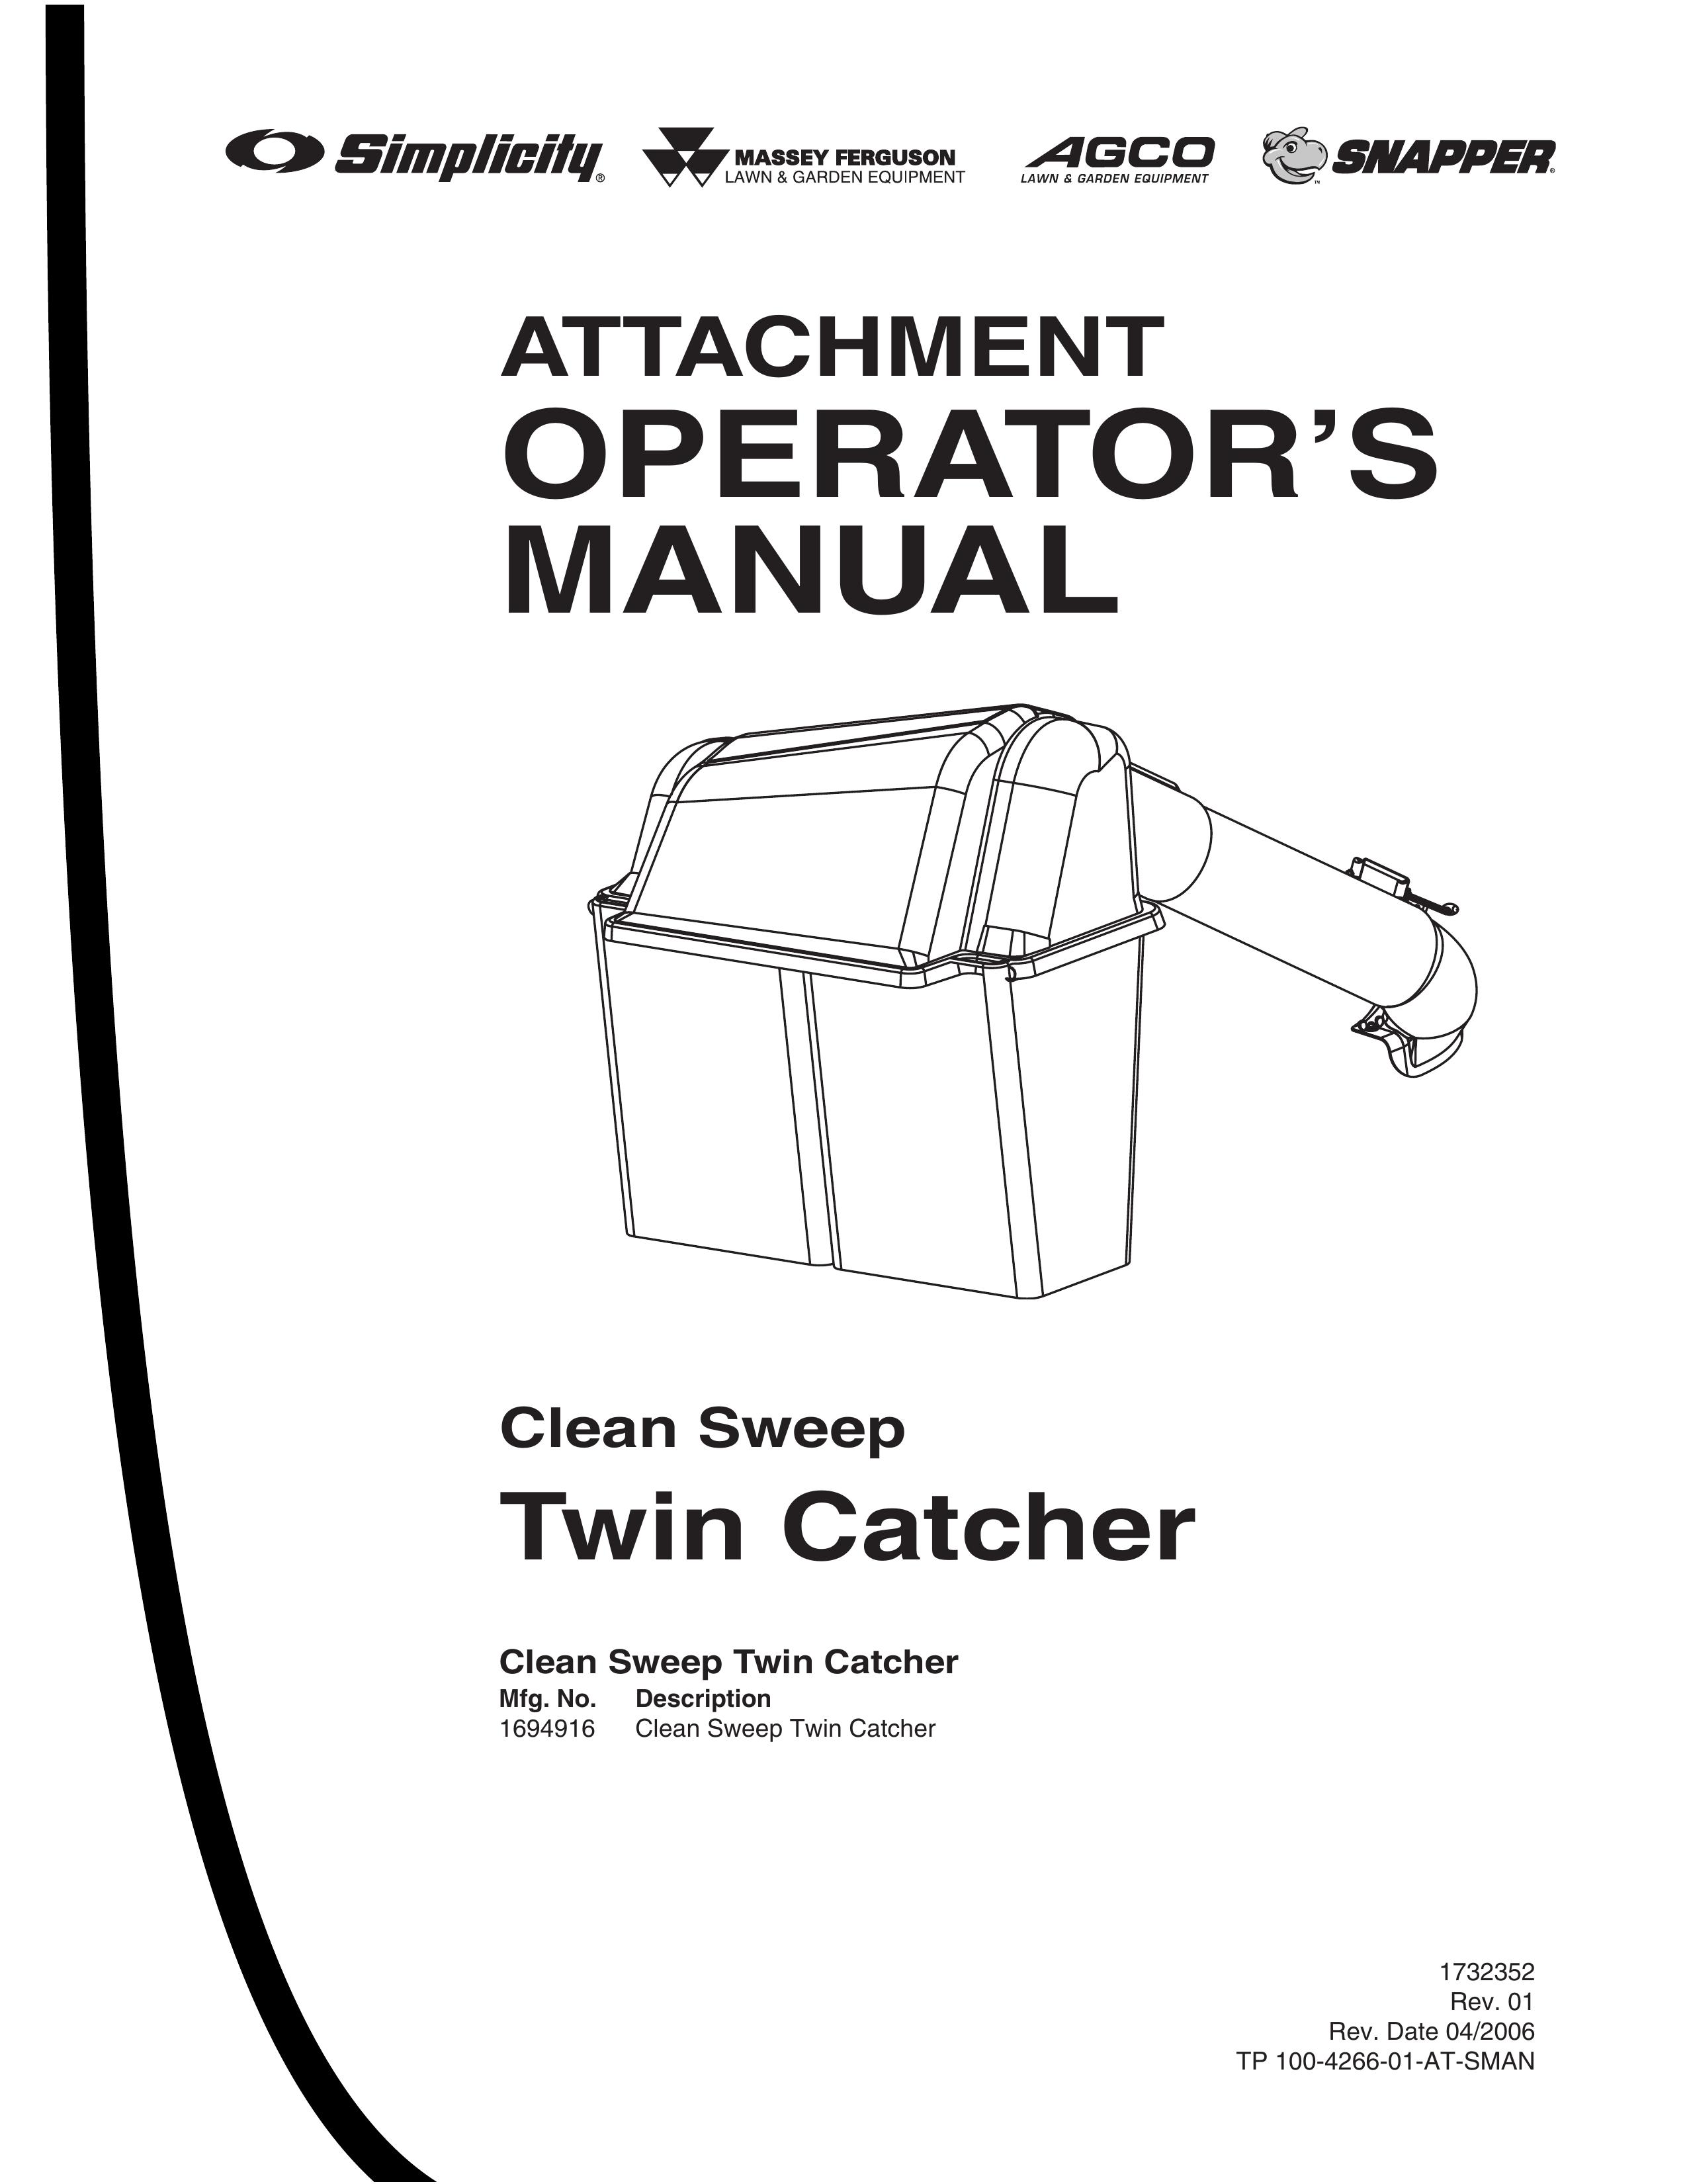 Snapper Clean Sweep Twin Catcher Lawn Sweeper User Manual